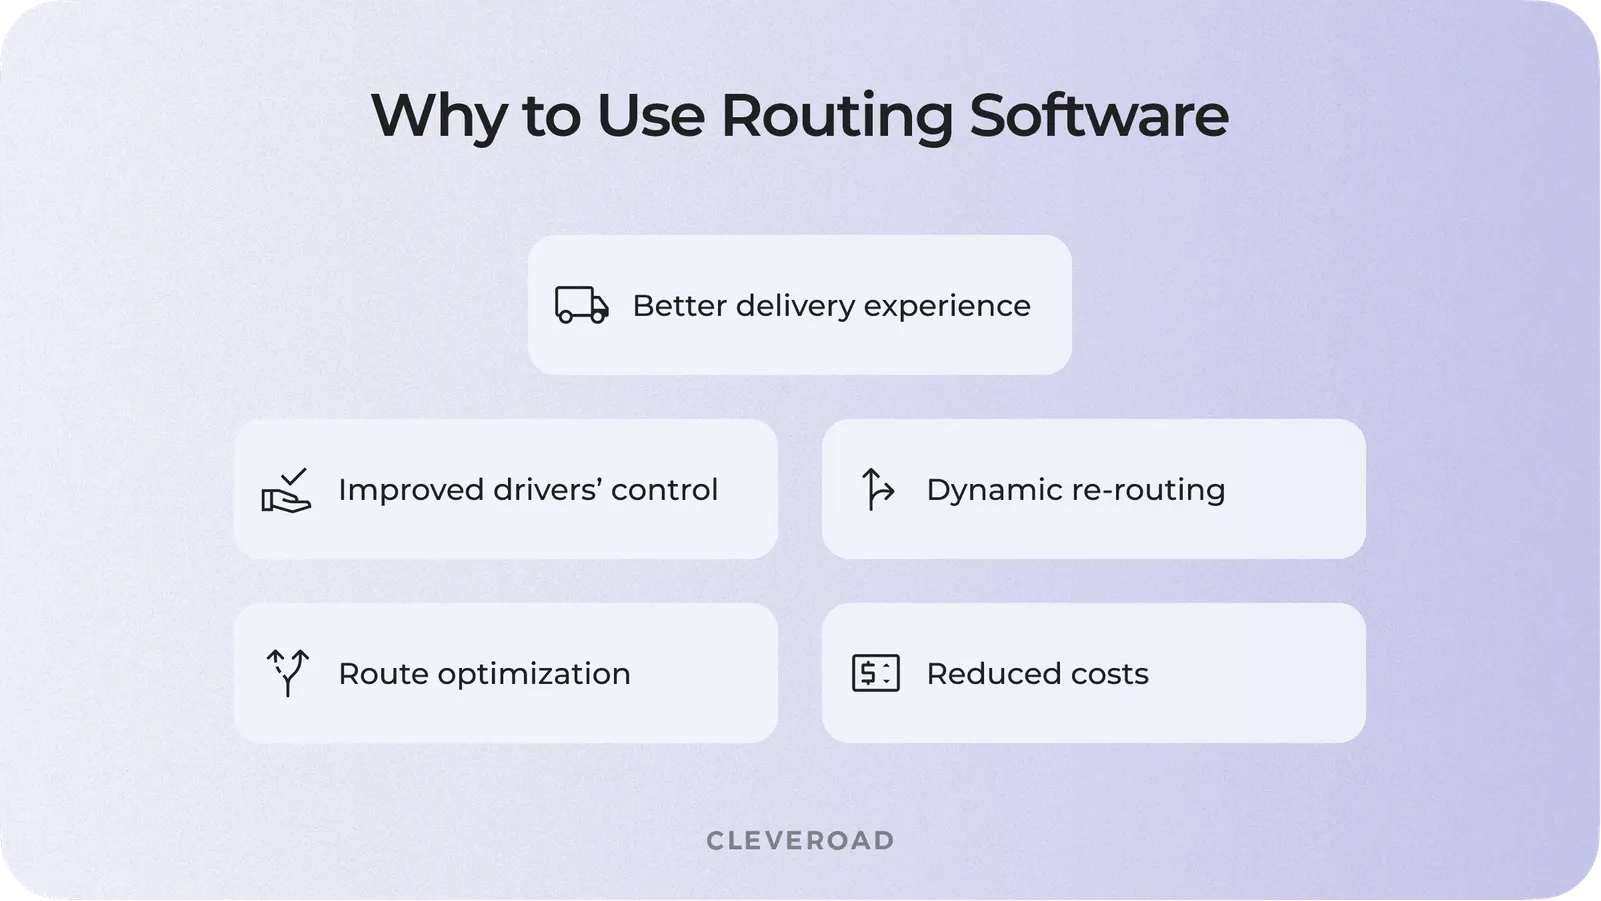 Why to use routing optimization software